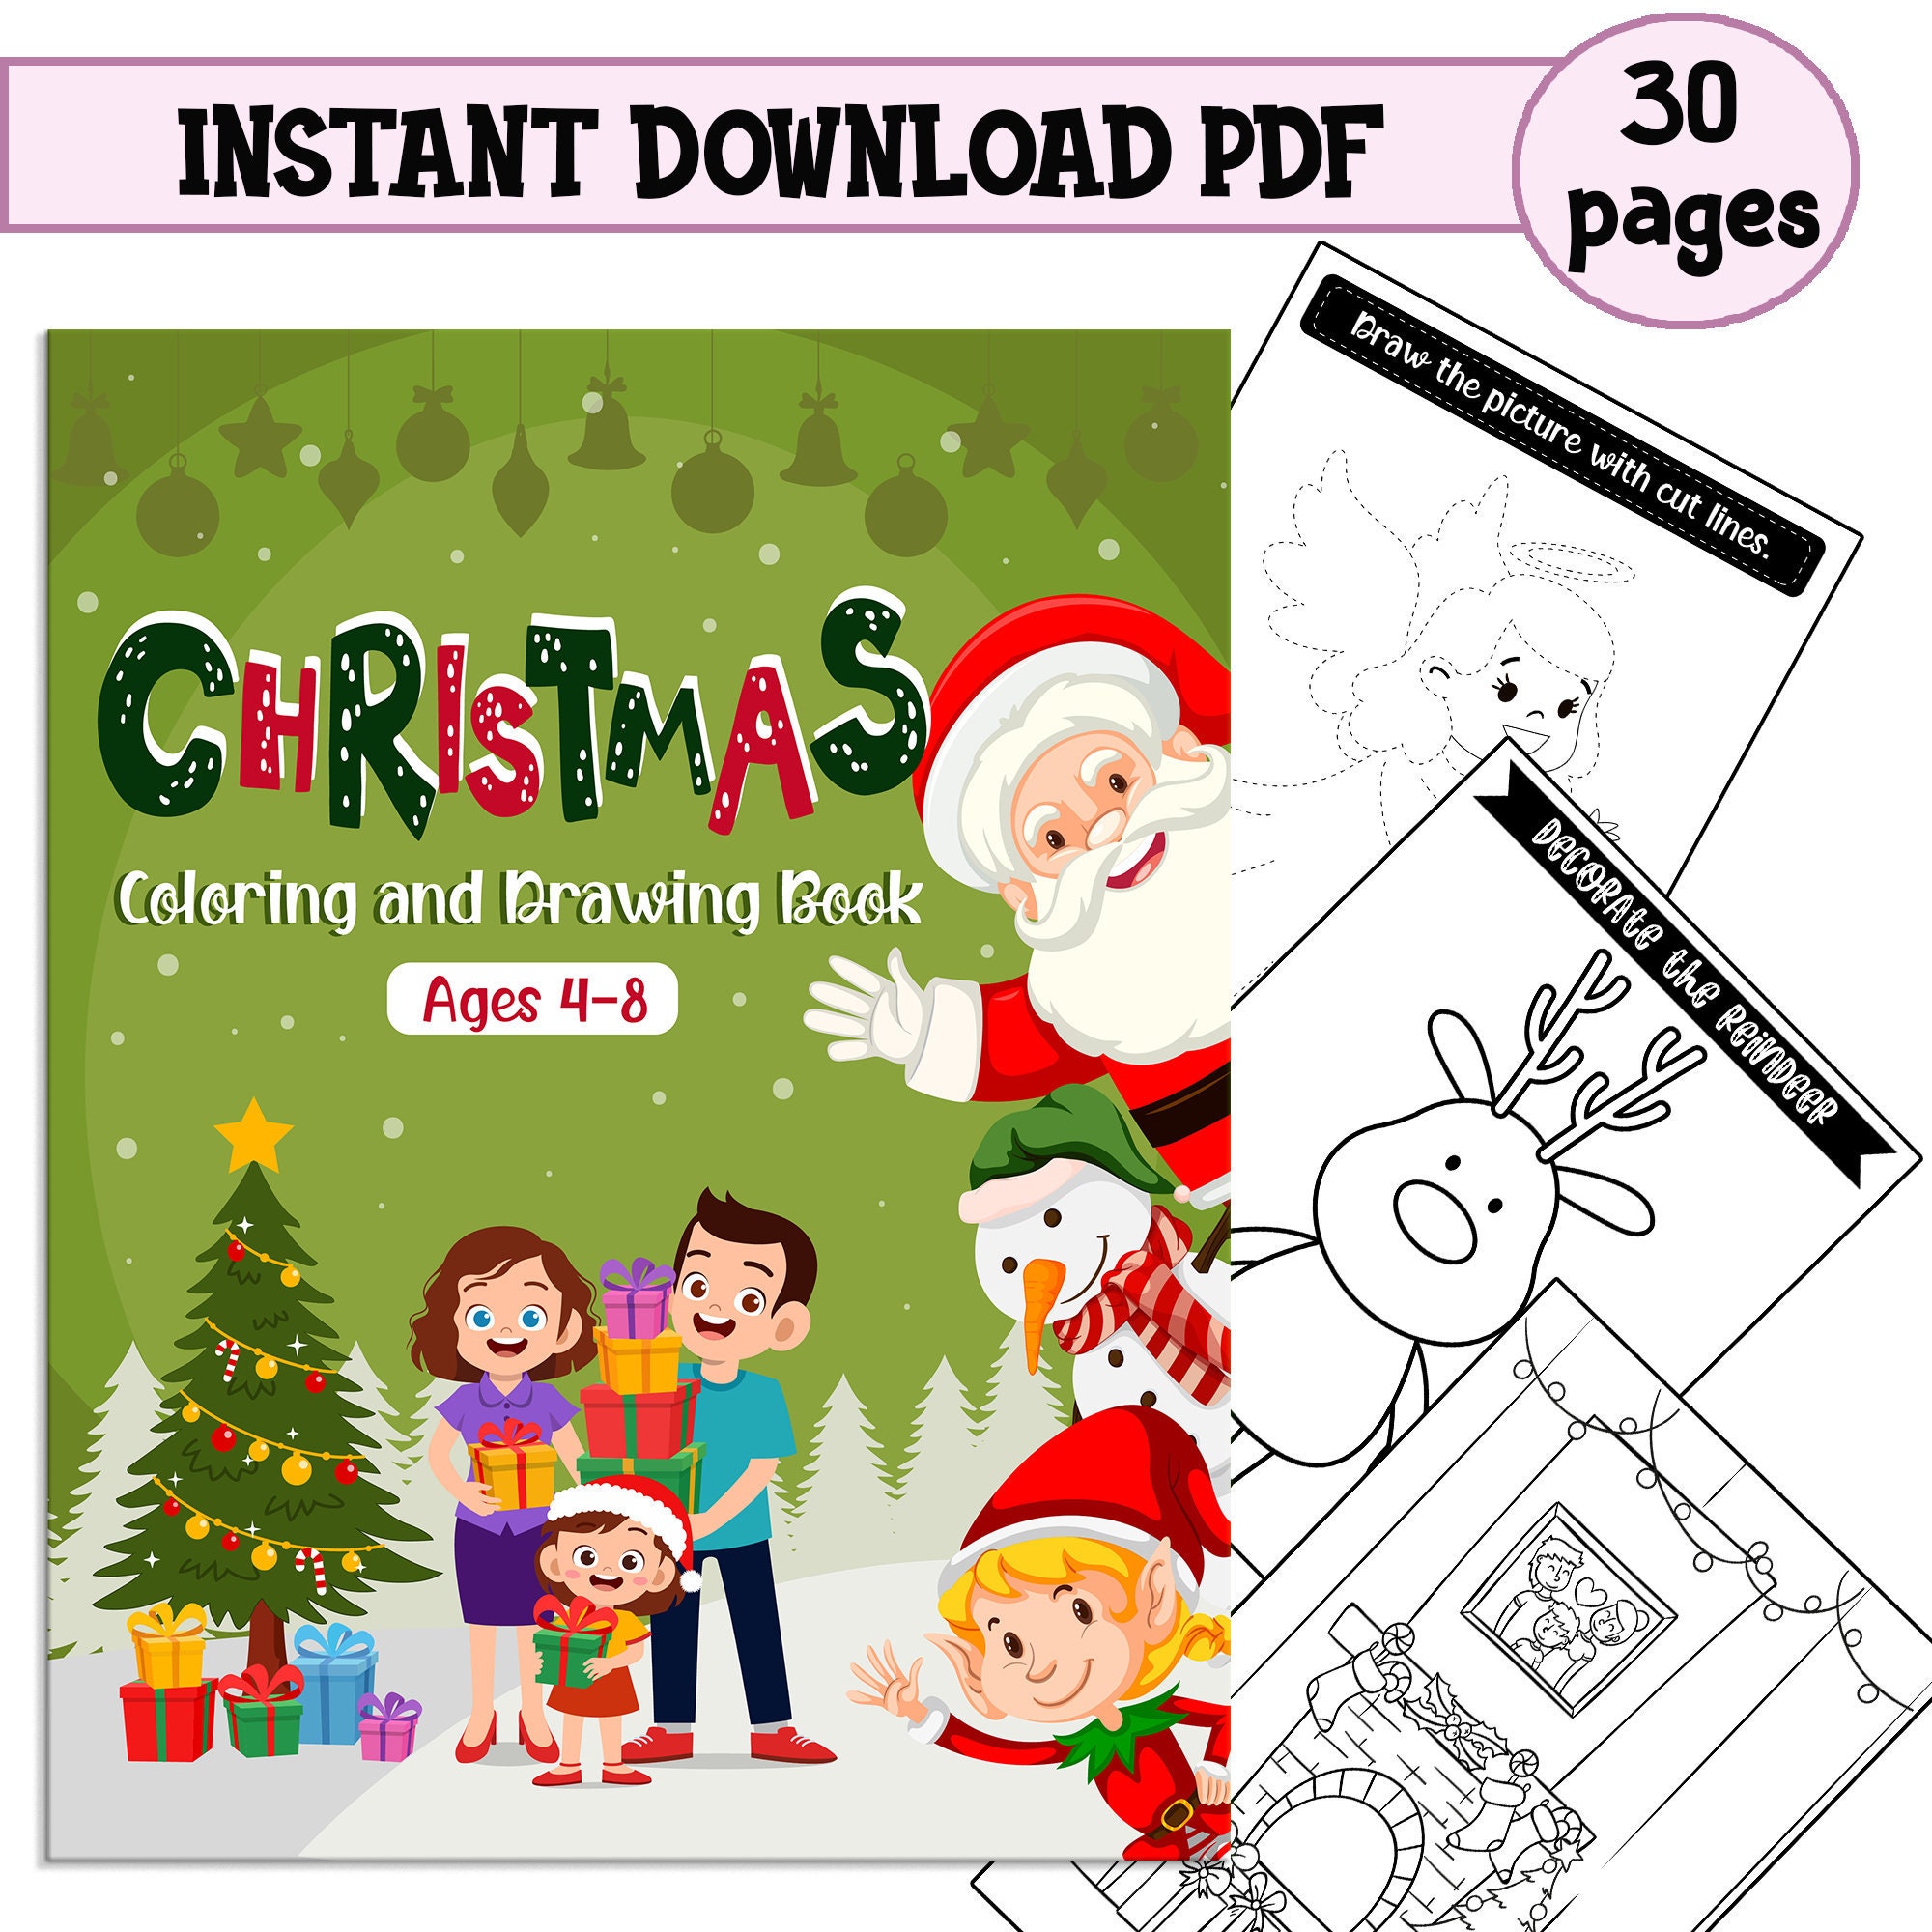 How to draw Christmas for Kids ages 4 - 8